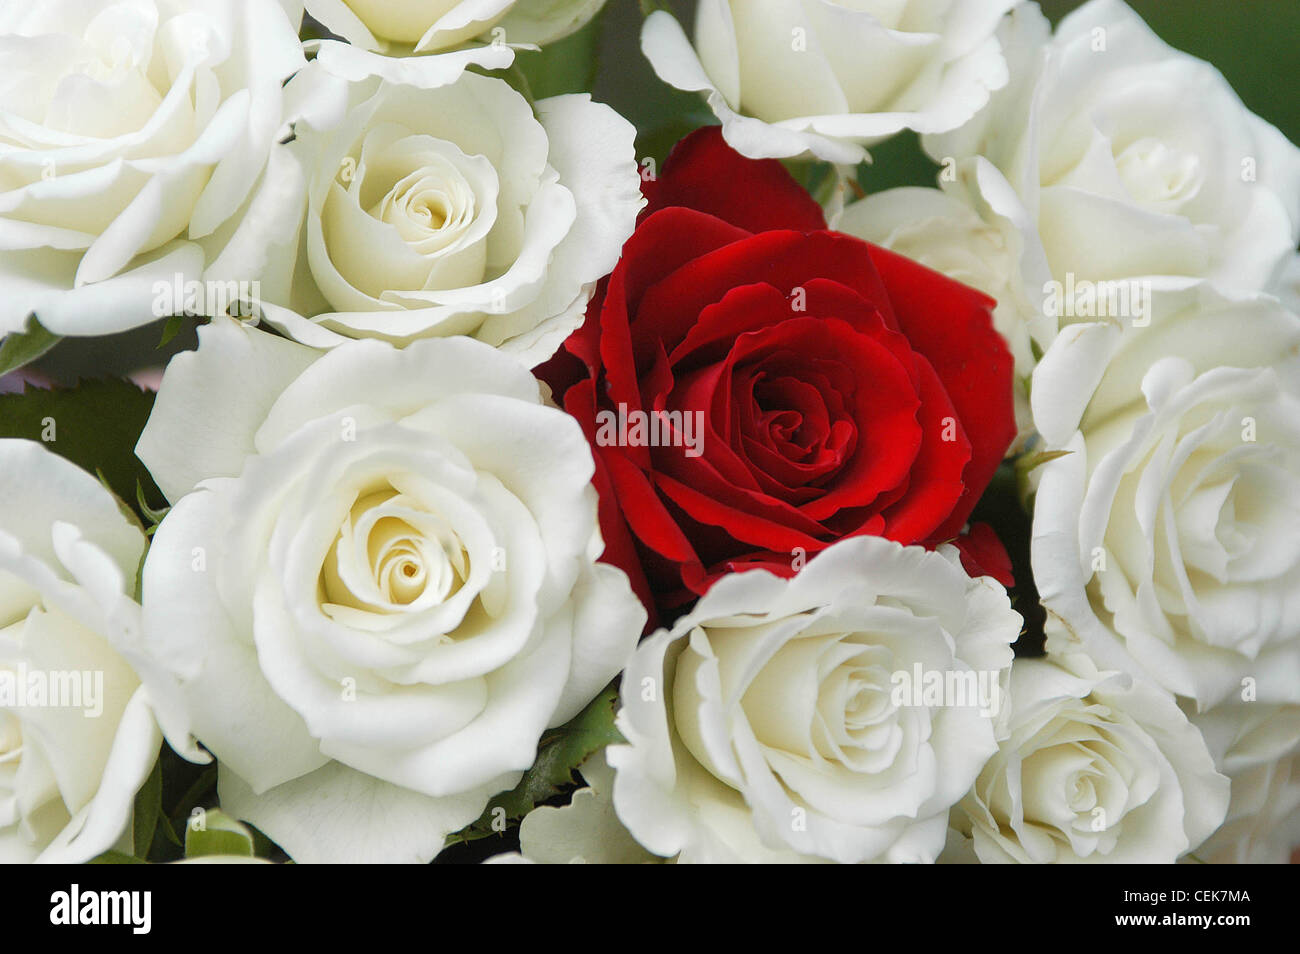 Close up of red rose amongst white roses Stock Photo